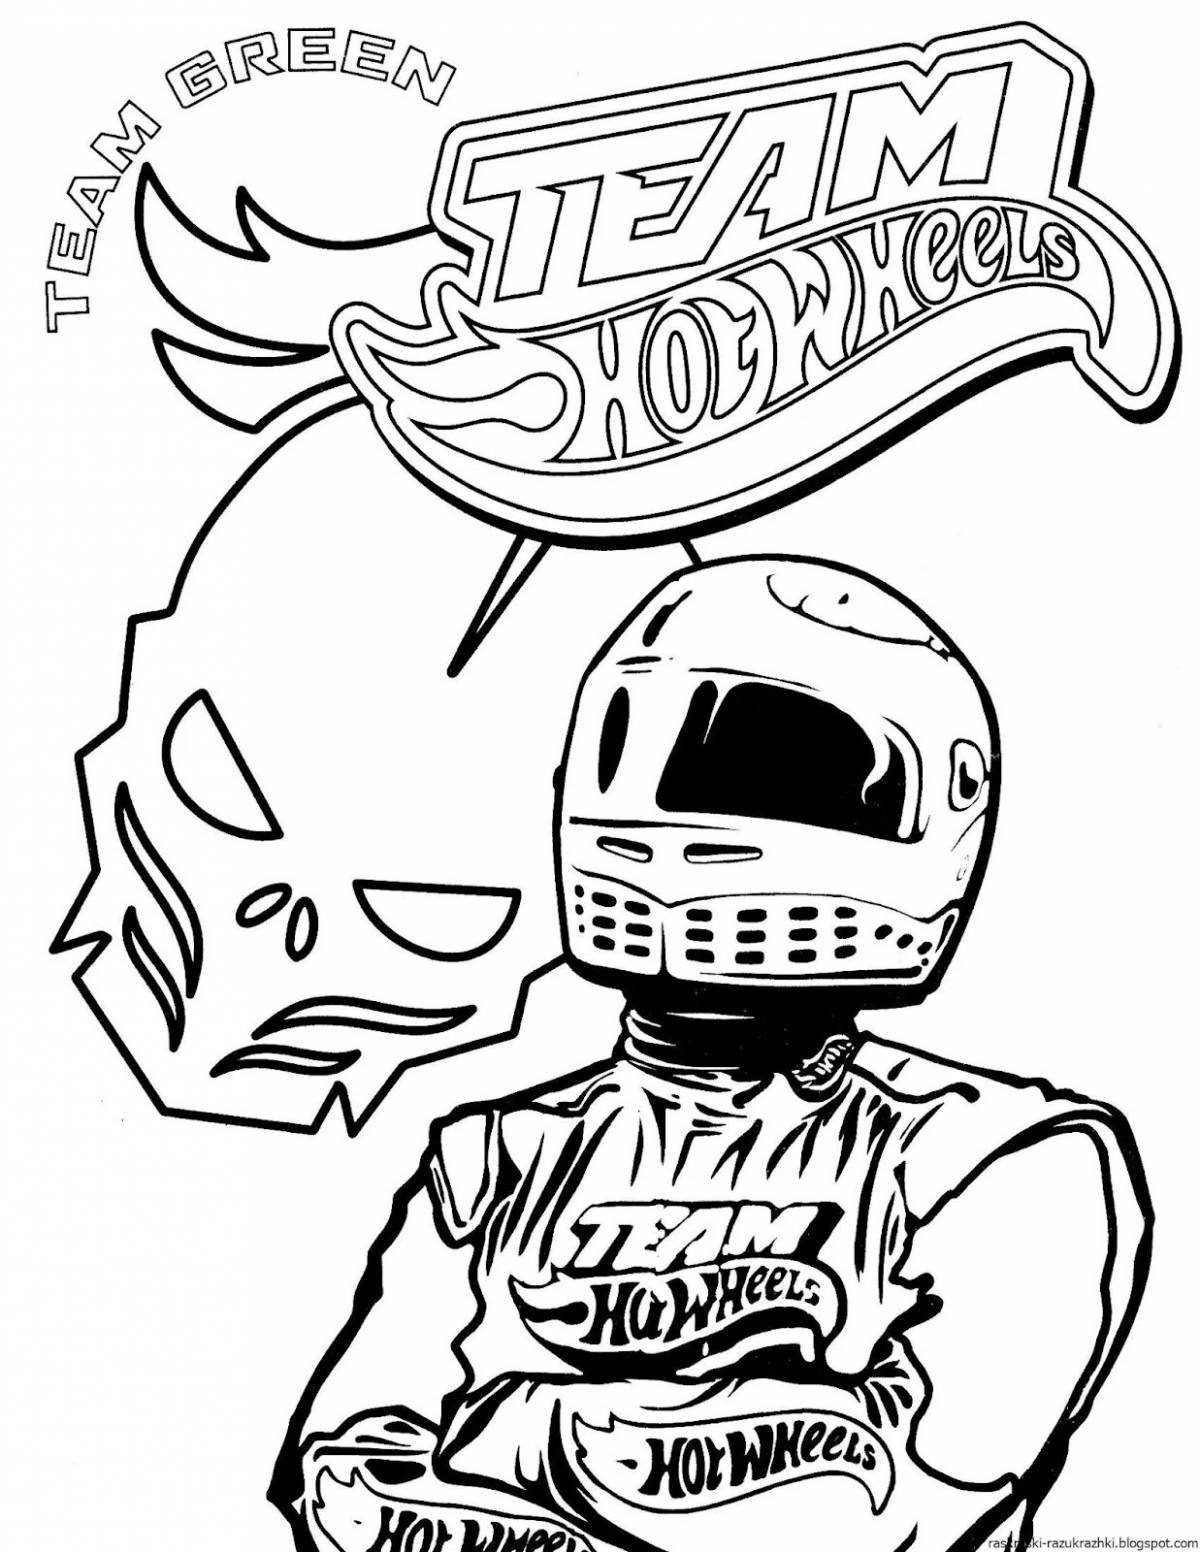 Attractive coloring pages of hot wheels cars